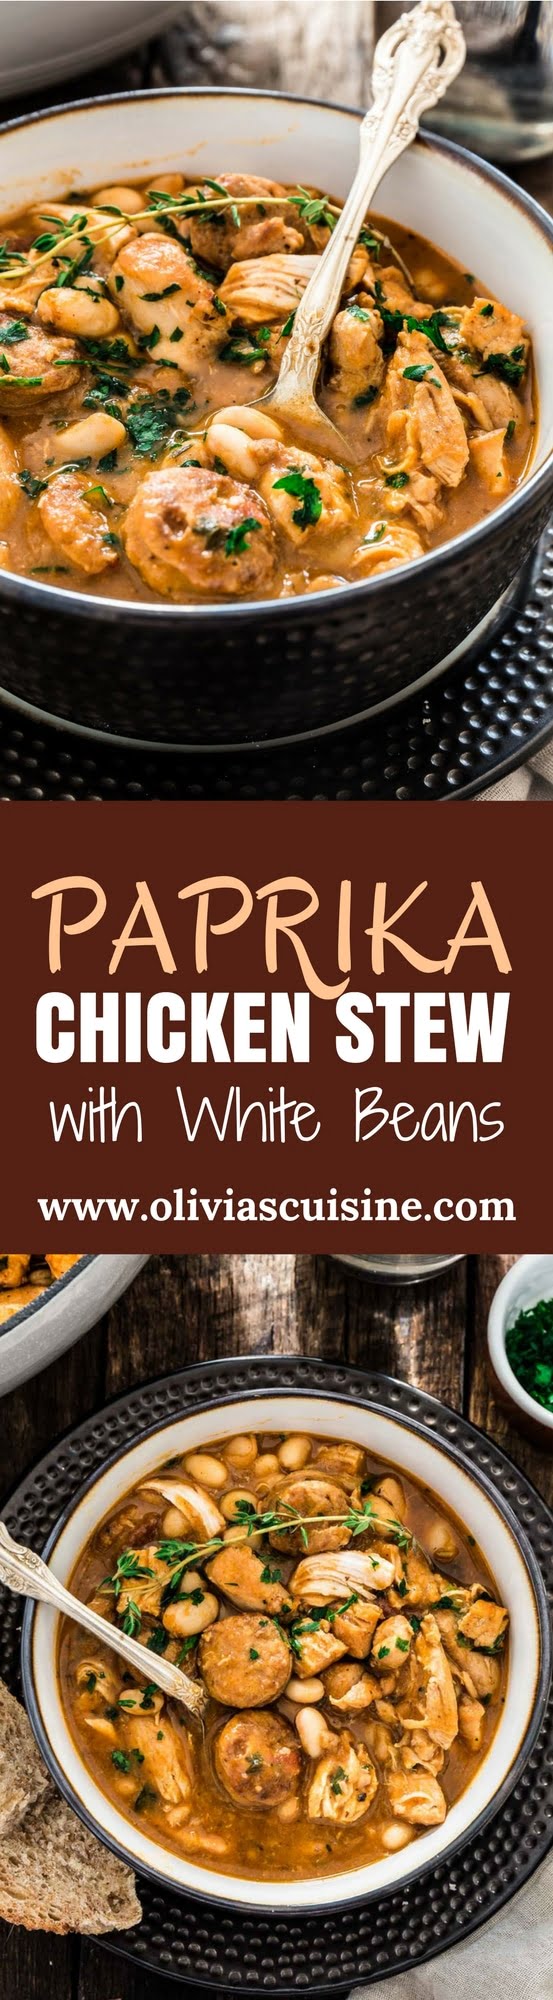 Brazilian Paprika Chicken Stew | www.oliviascuisine.com | A hearty and comforting Brazilian Paprika Chicken Stew is possibly one of the best ways to warm up this fall/winter. It is also very easy to make and done in one pot!